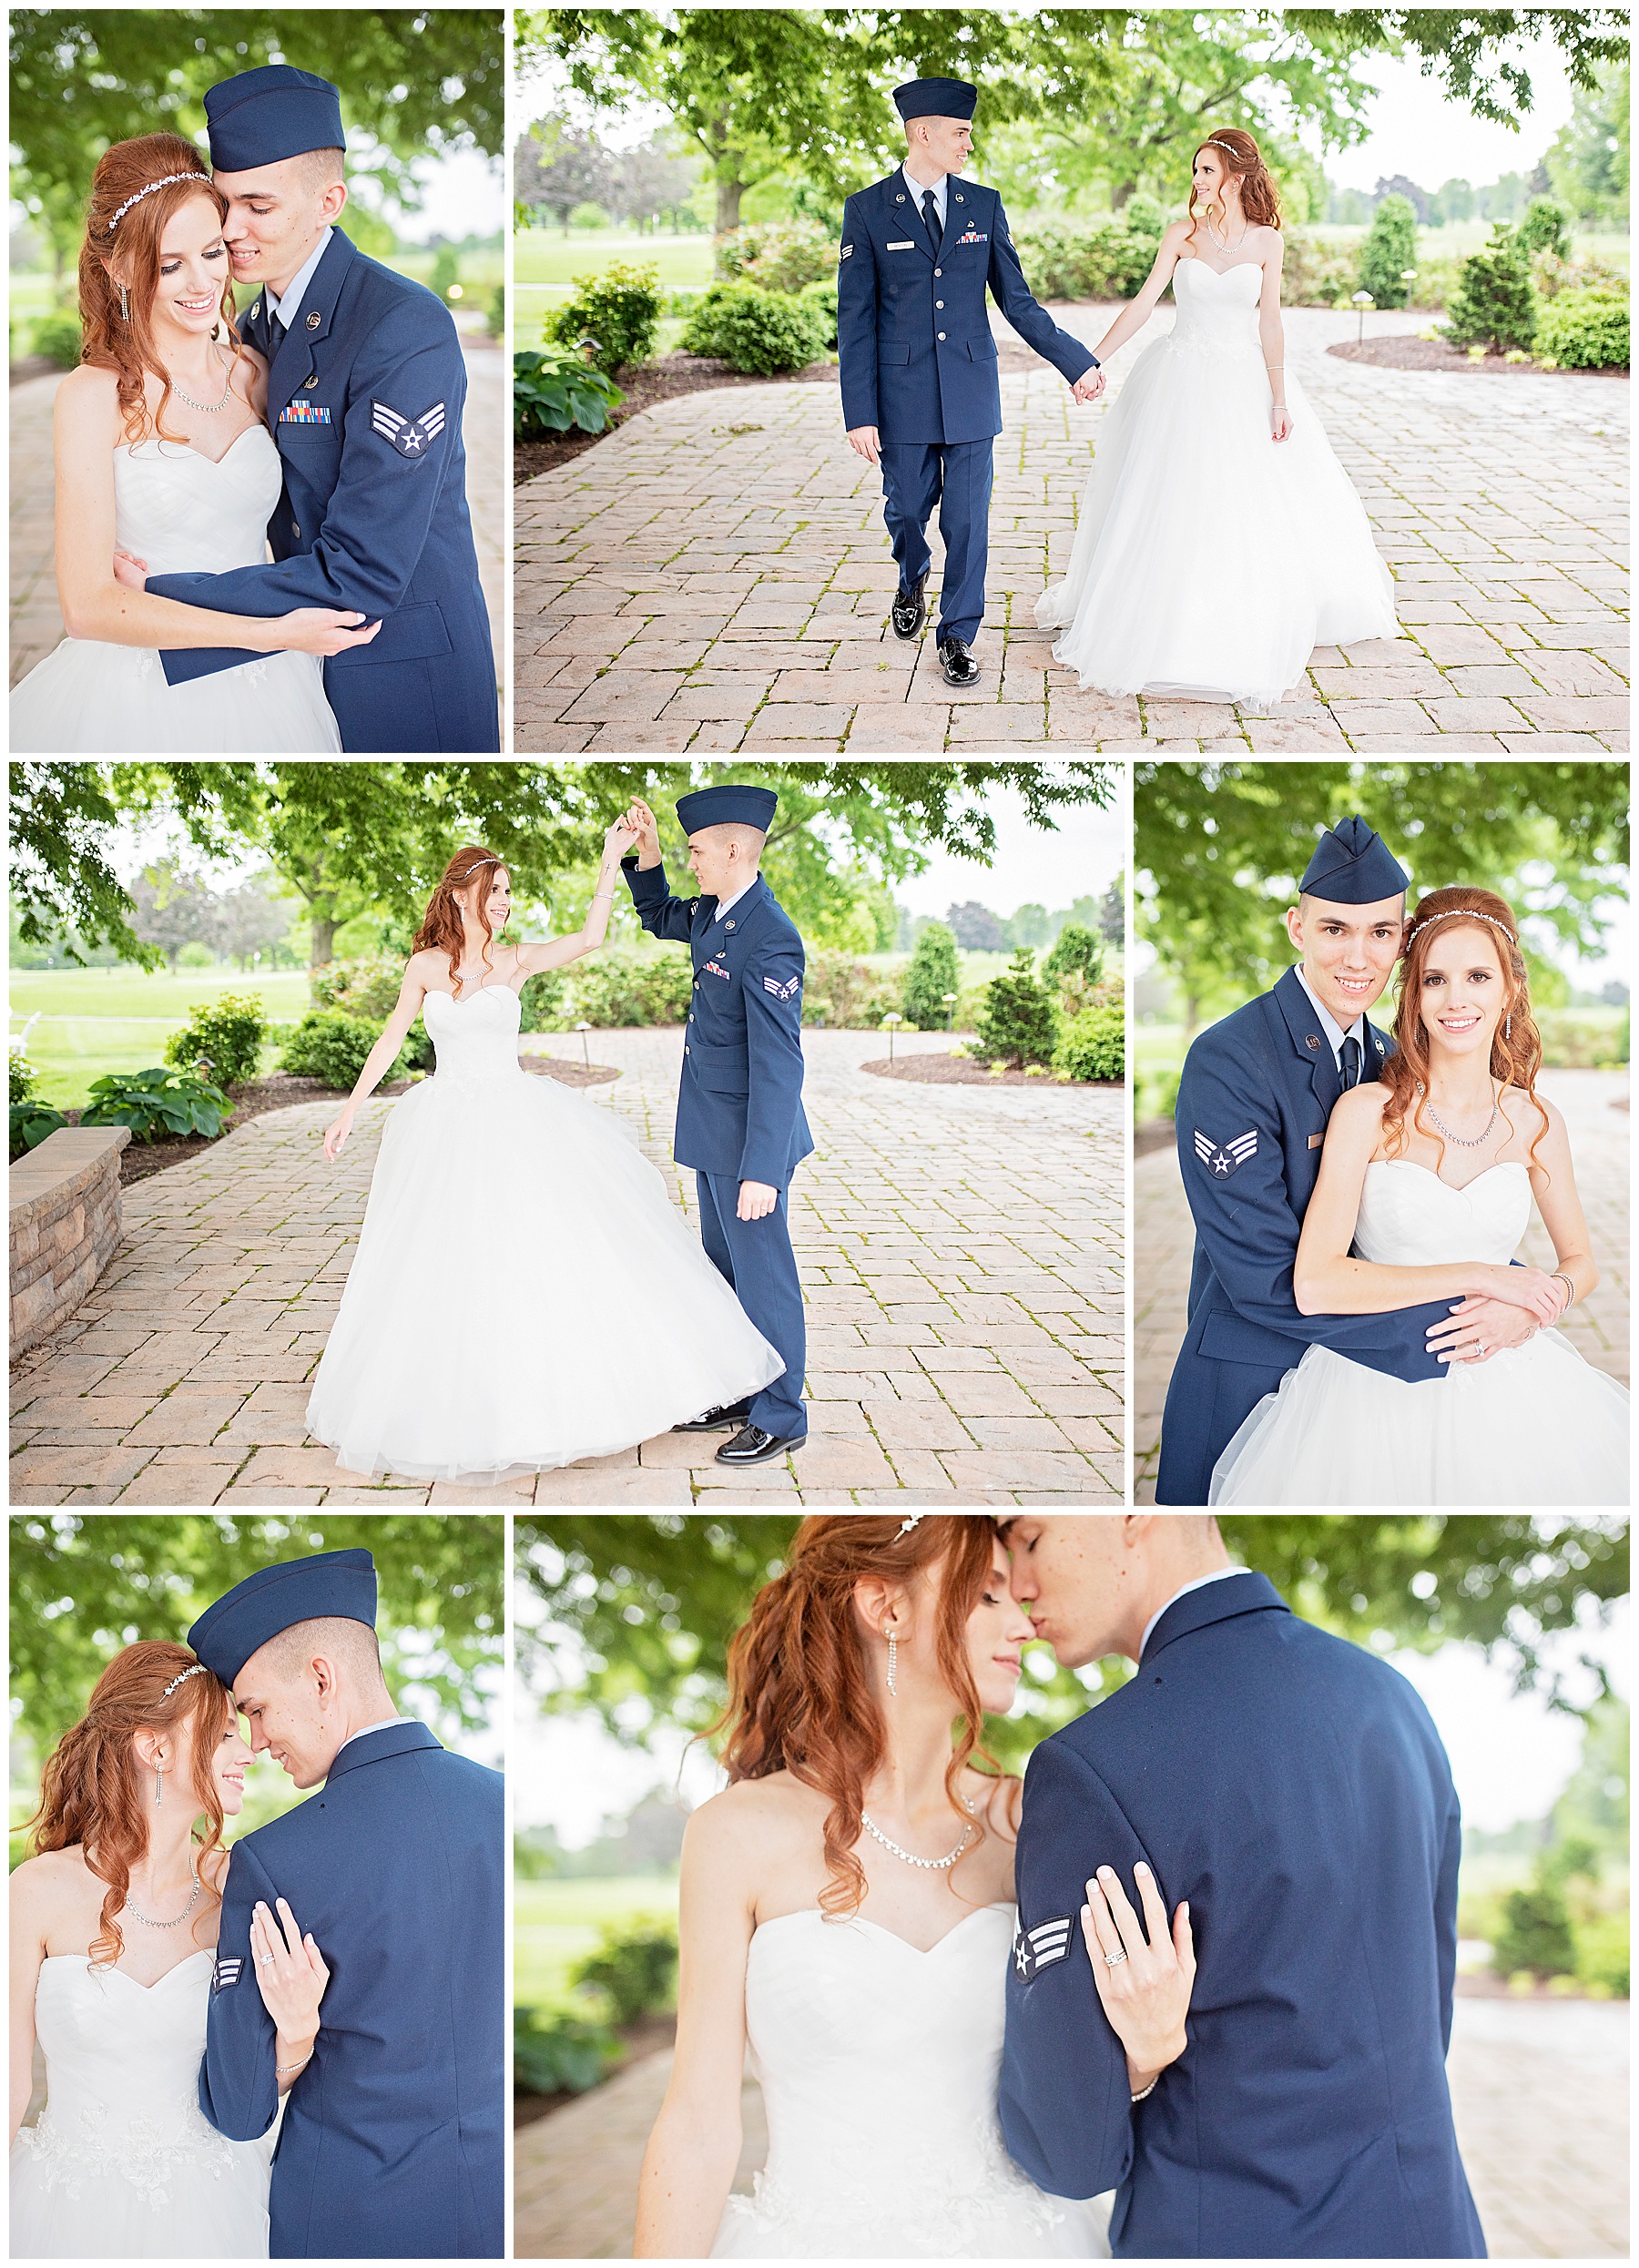 Bride and Groom Portraits at the Outdoor Country Club